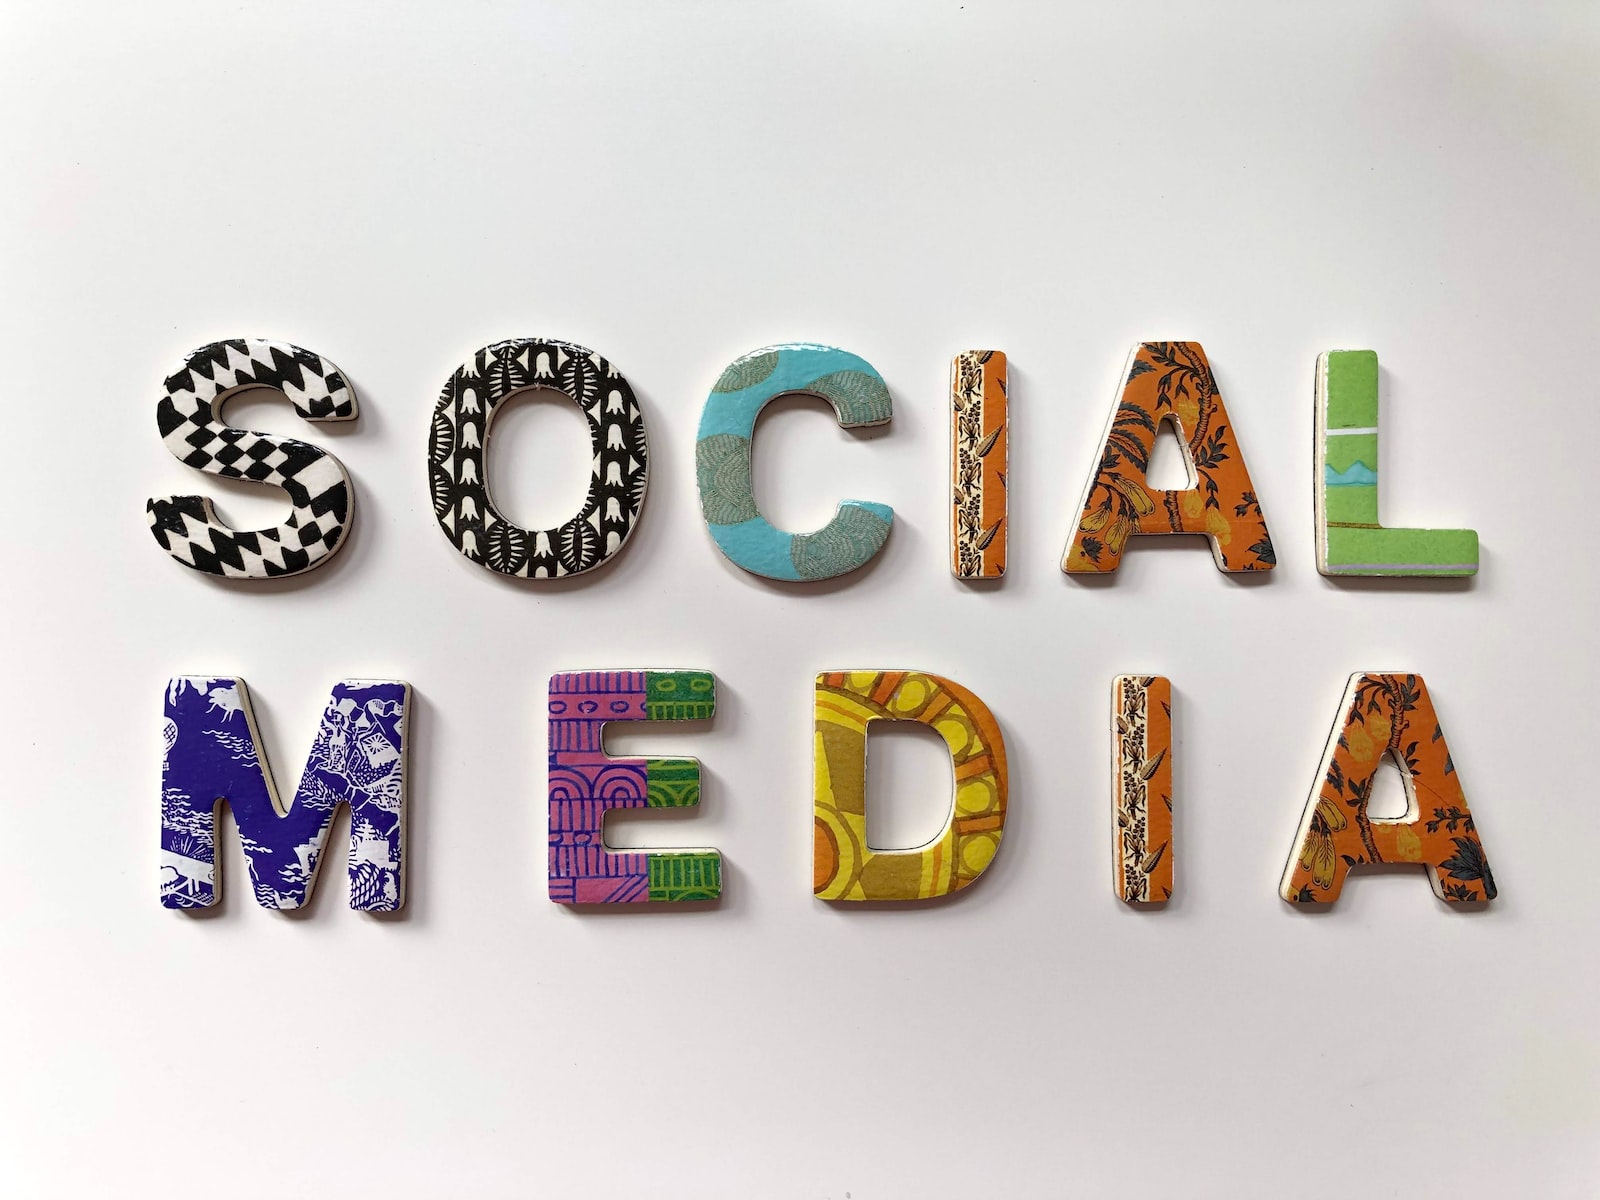 Is a career in Social Media for you?